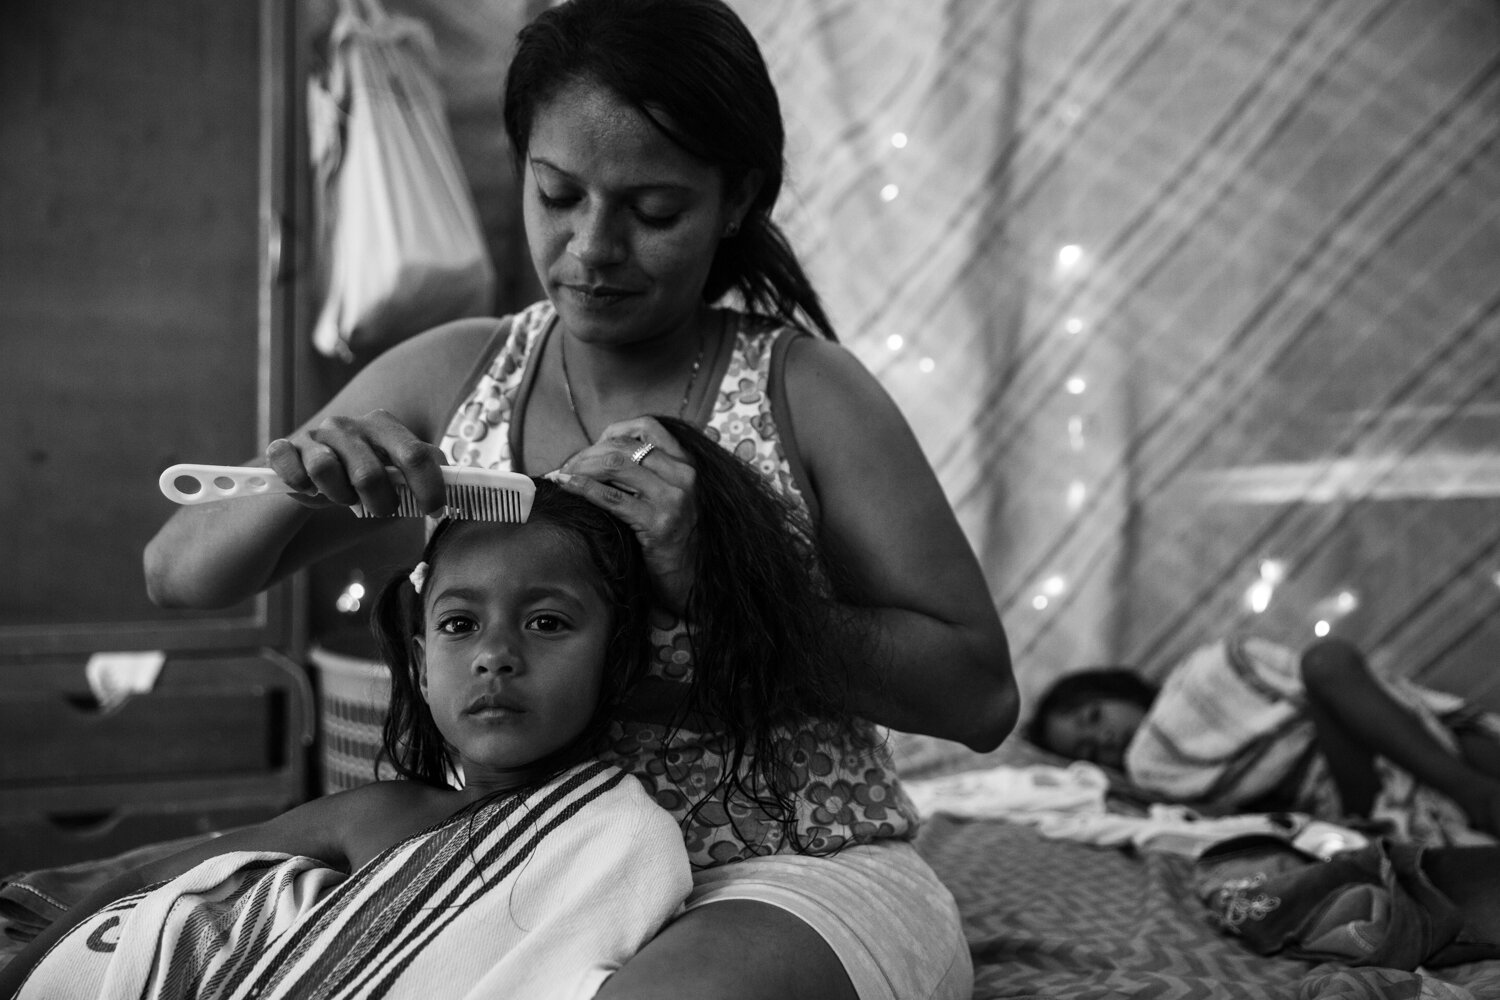  Leibys Garcia combs her daughter's hair in the bedroom that they share as a family. The Garcia family left Venezuela in search of stable work and housing over a year ago, but in a country overwhelmed by the Venezuelan migration, Leibys ended up here